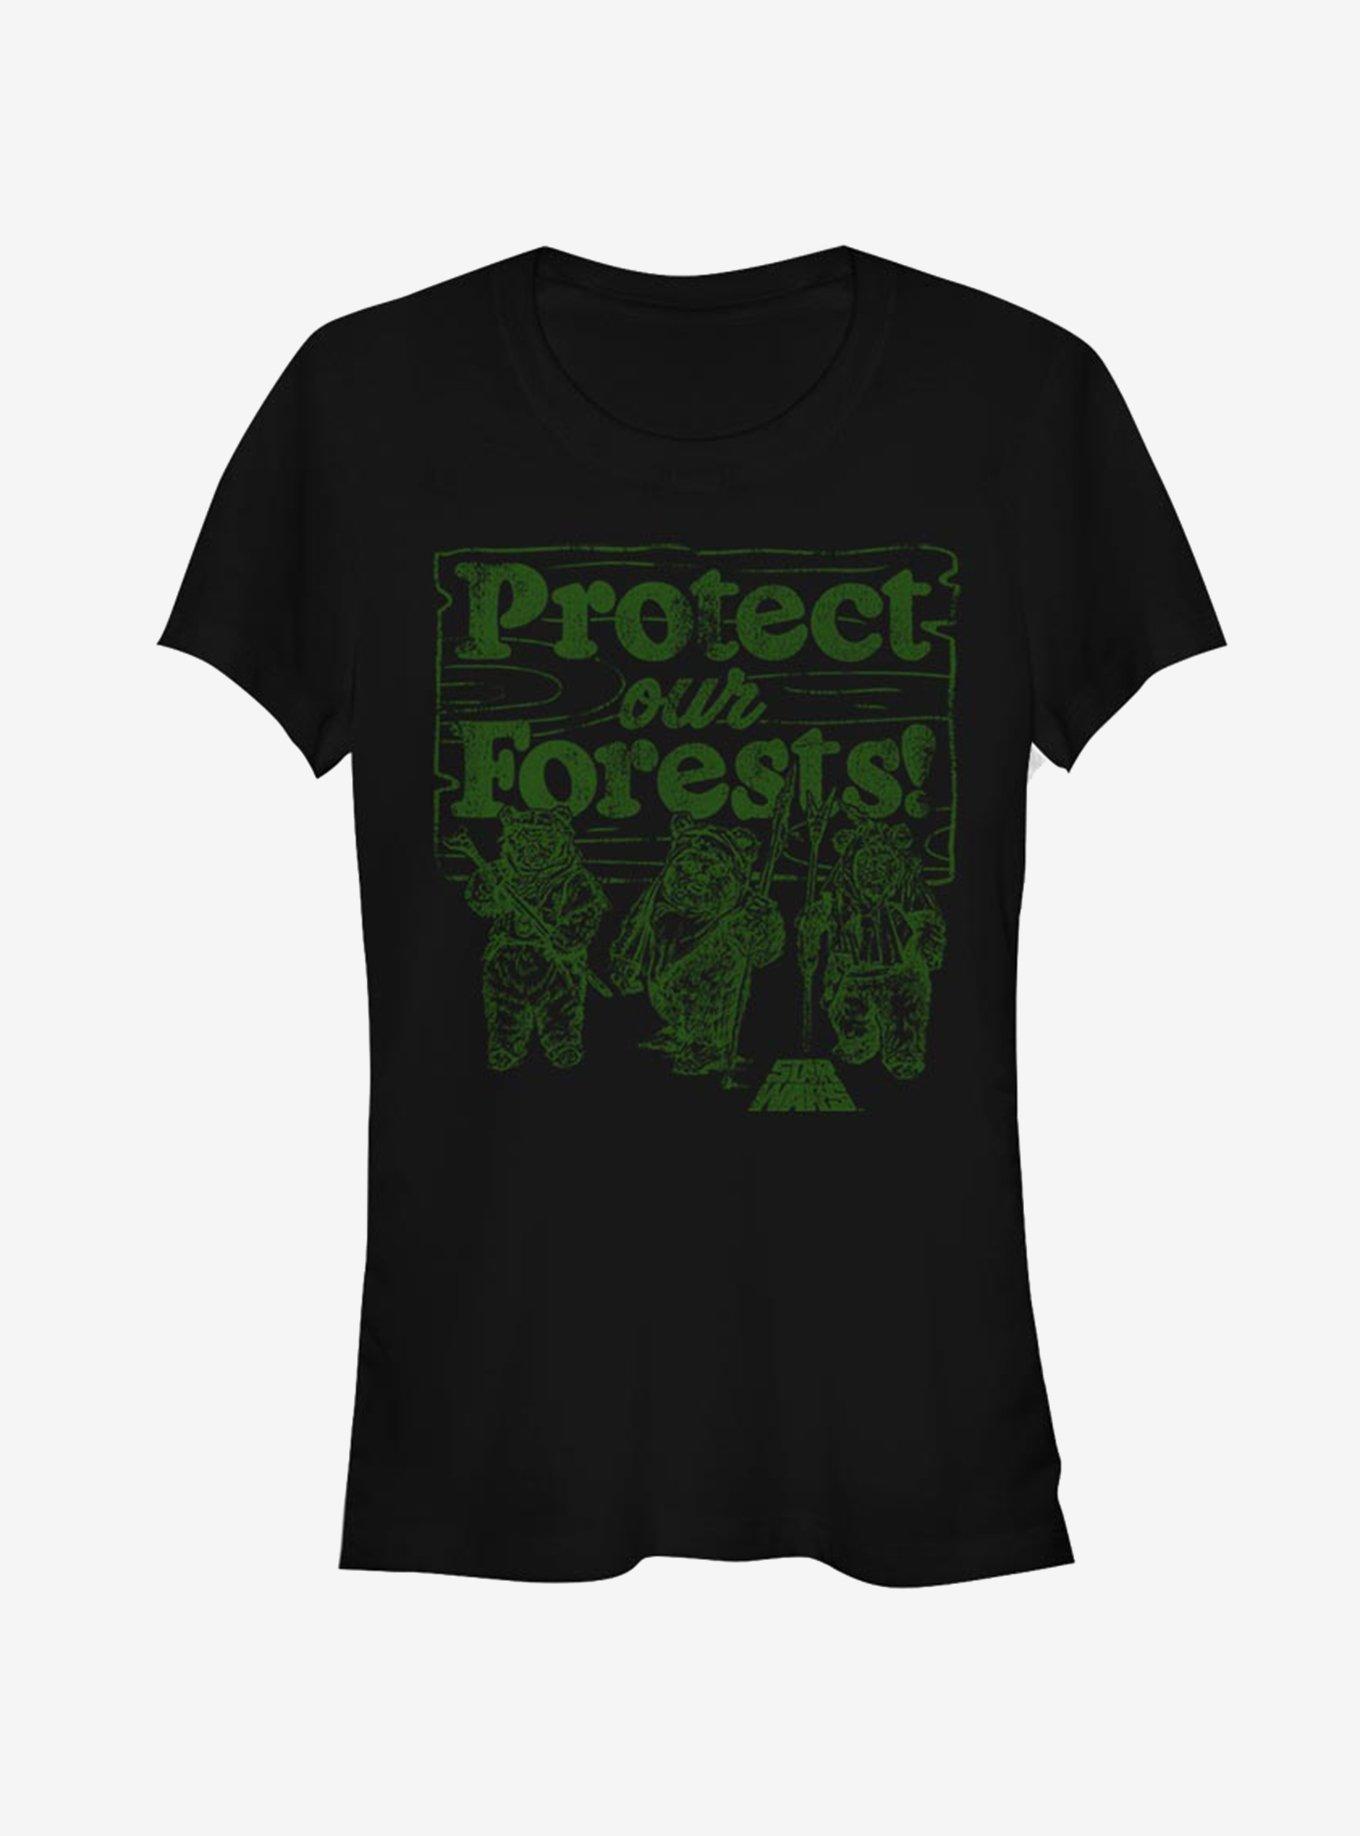 Star Wars Protect Our Forests Girls T-Shirt, , hi-res